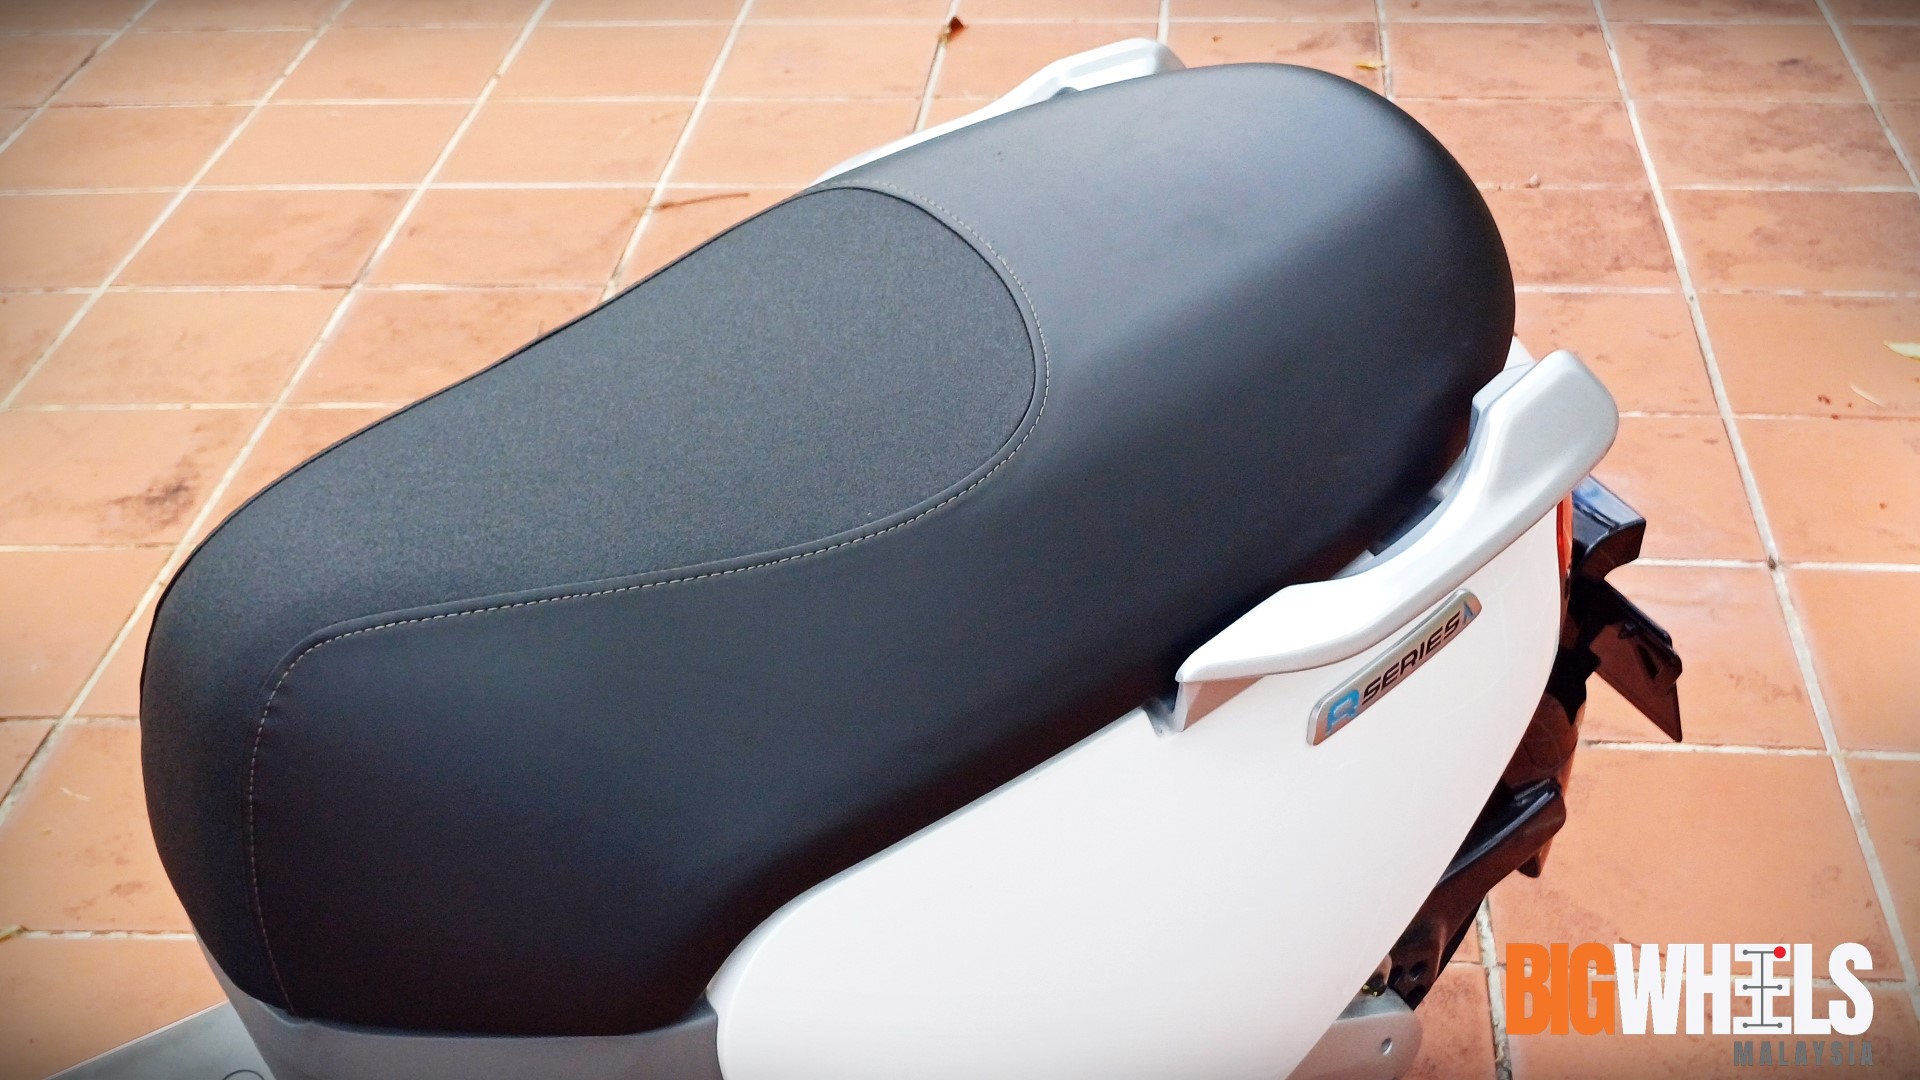 Blueshark R1 electric scooter review: Perfectly functional